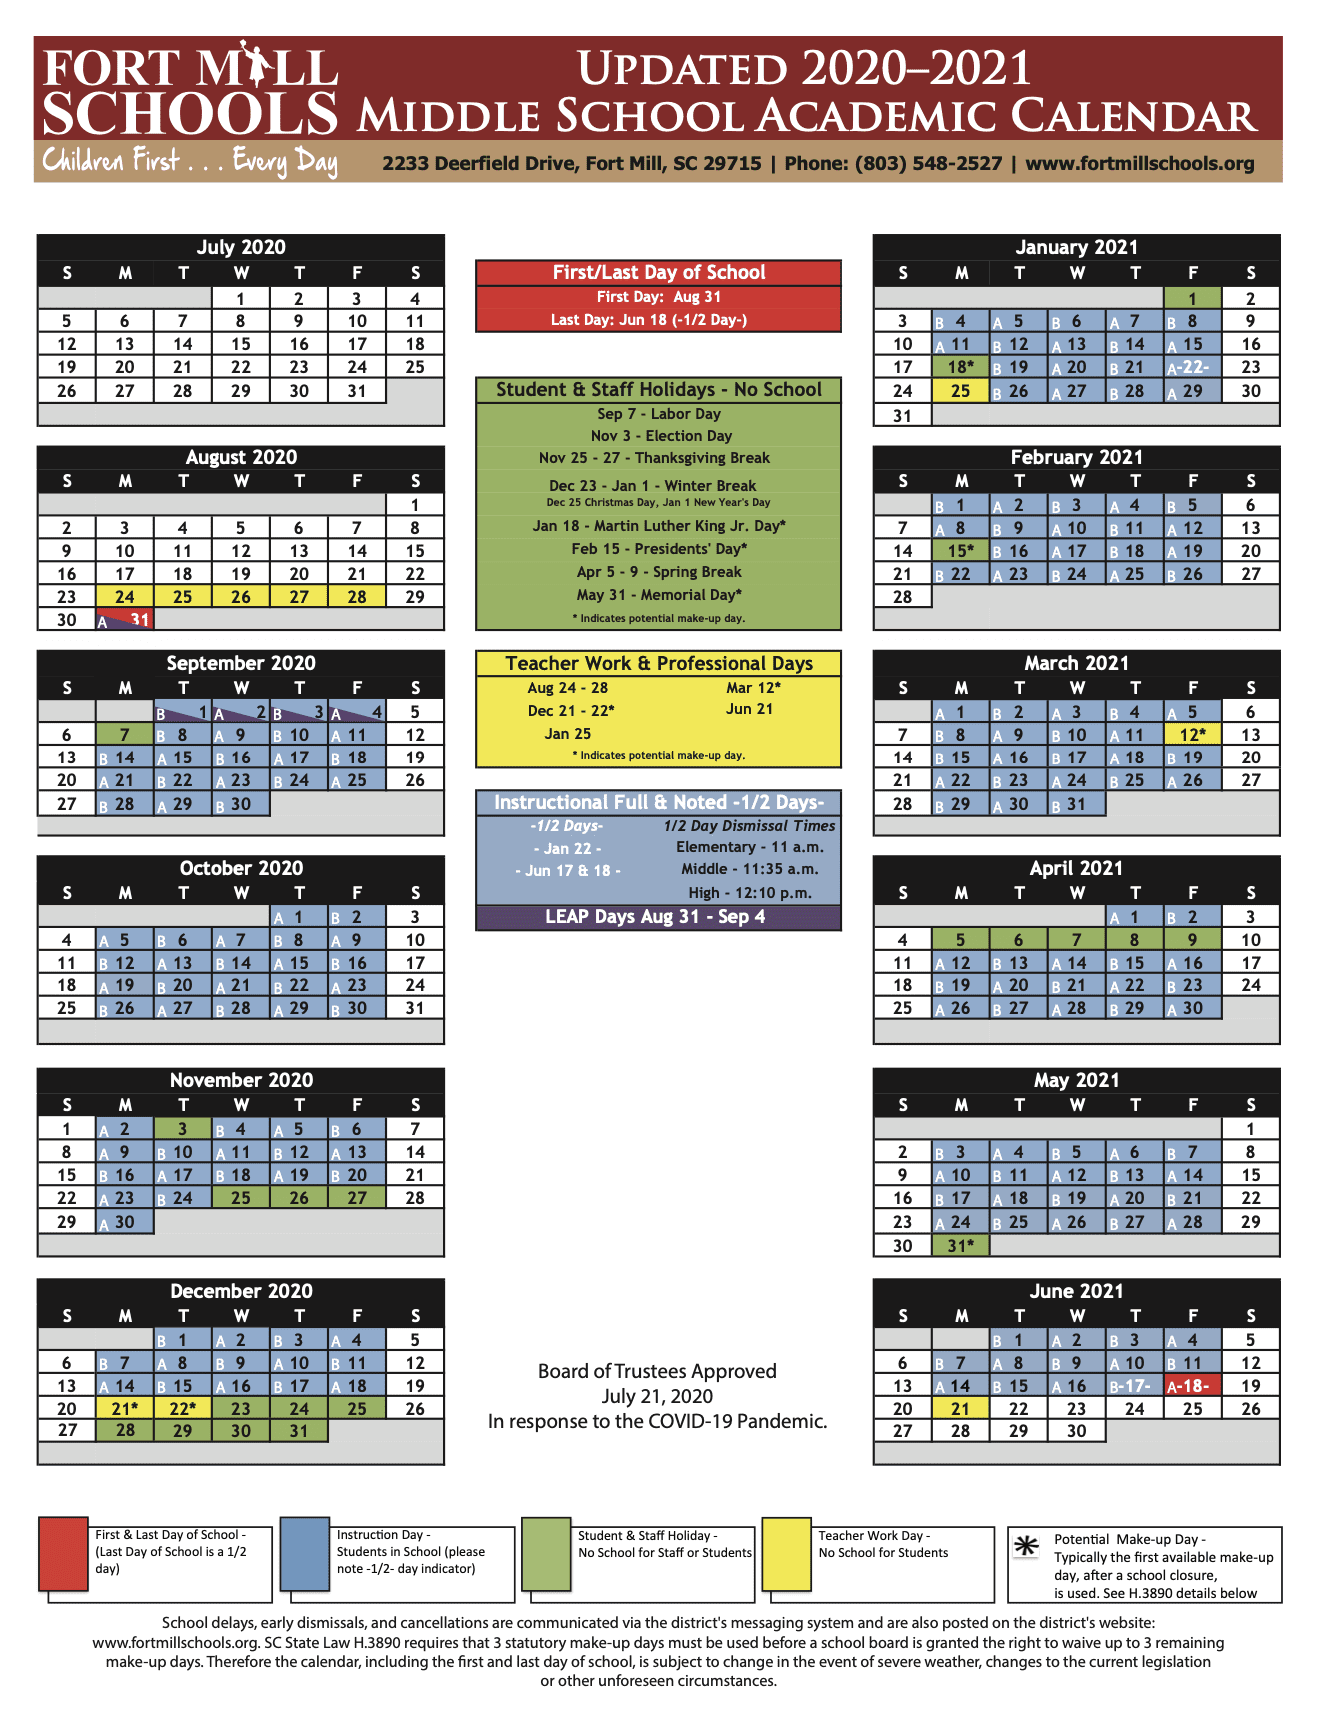 AB Calendars are Released for Elementary, Middle & High Schools in